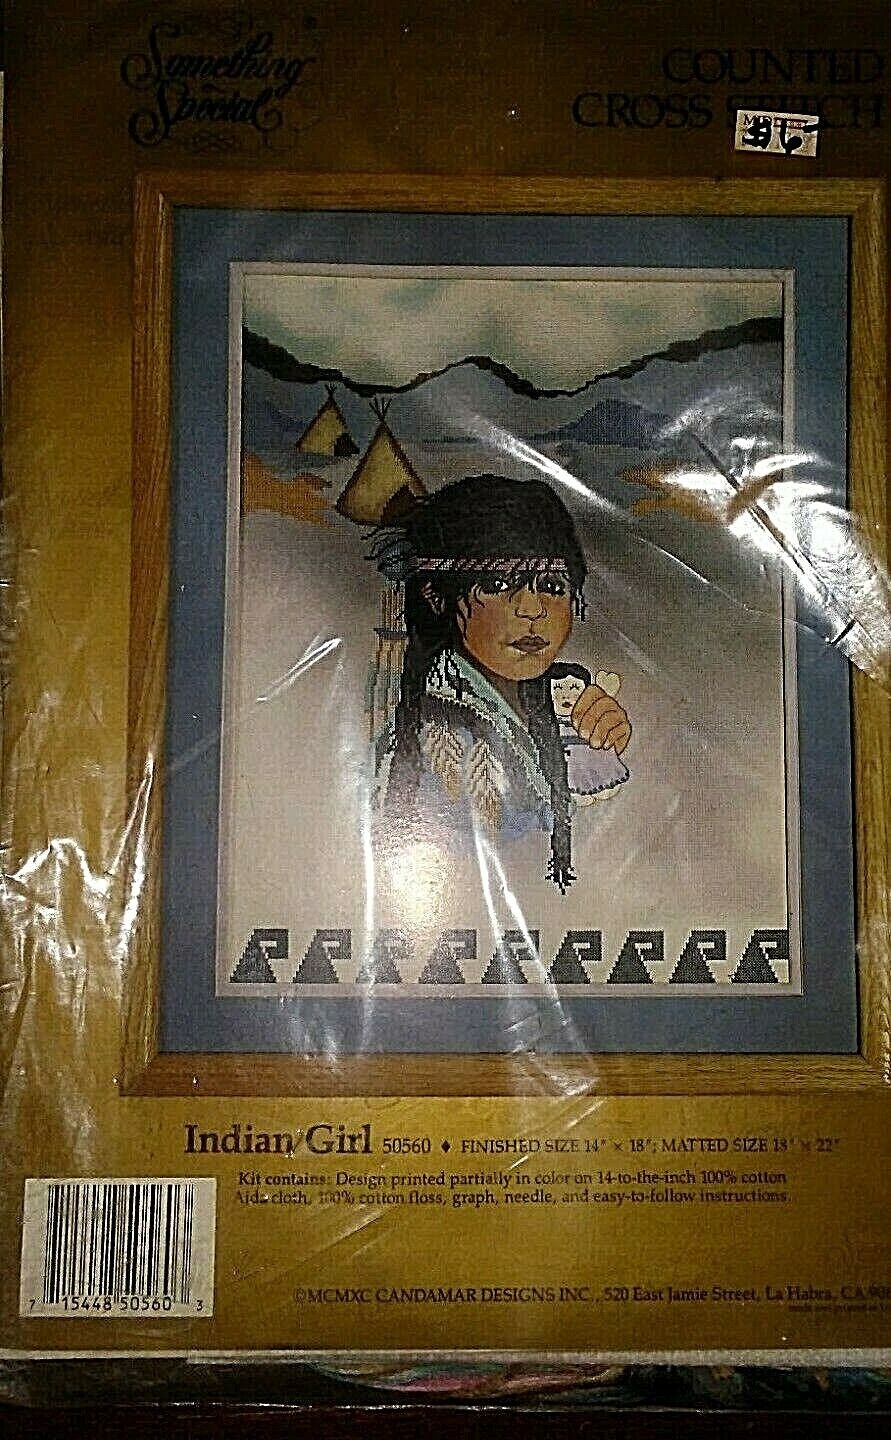 VTG SOMETHING SPECIAL COUNTED CROSS STITCH KIT INDIAN GIRL 50560 14" x 18" 1990